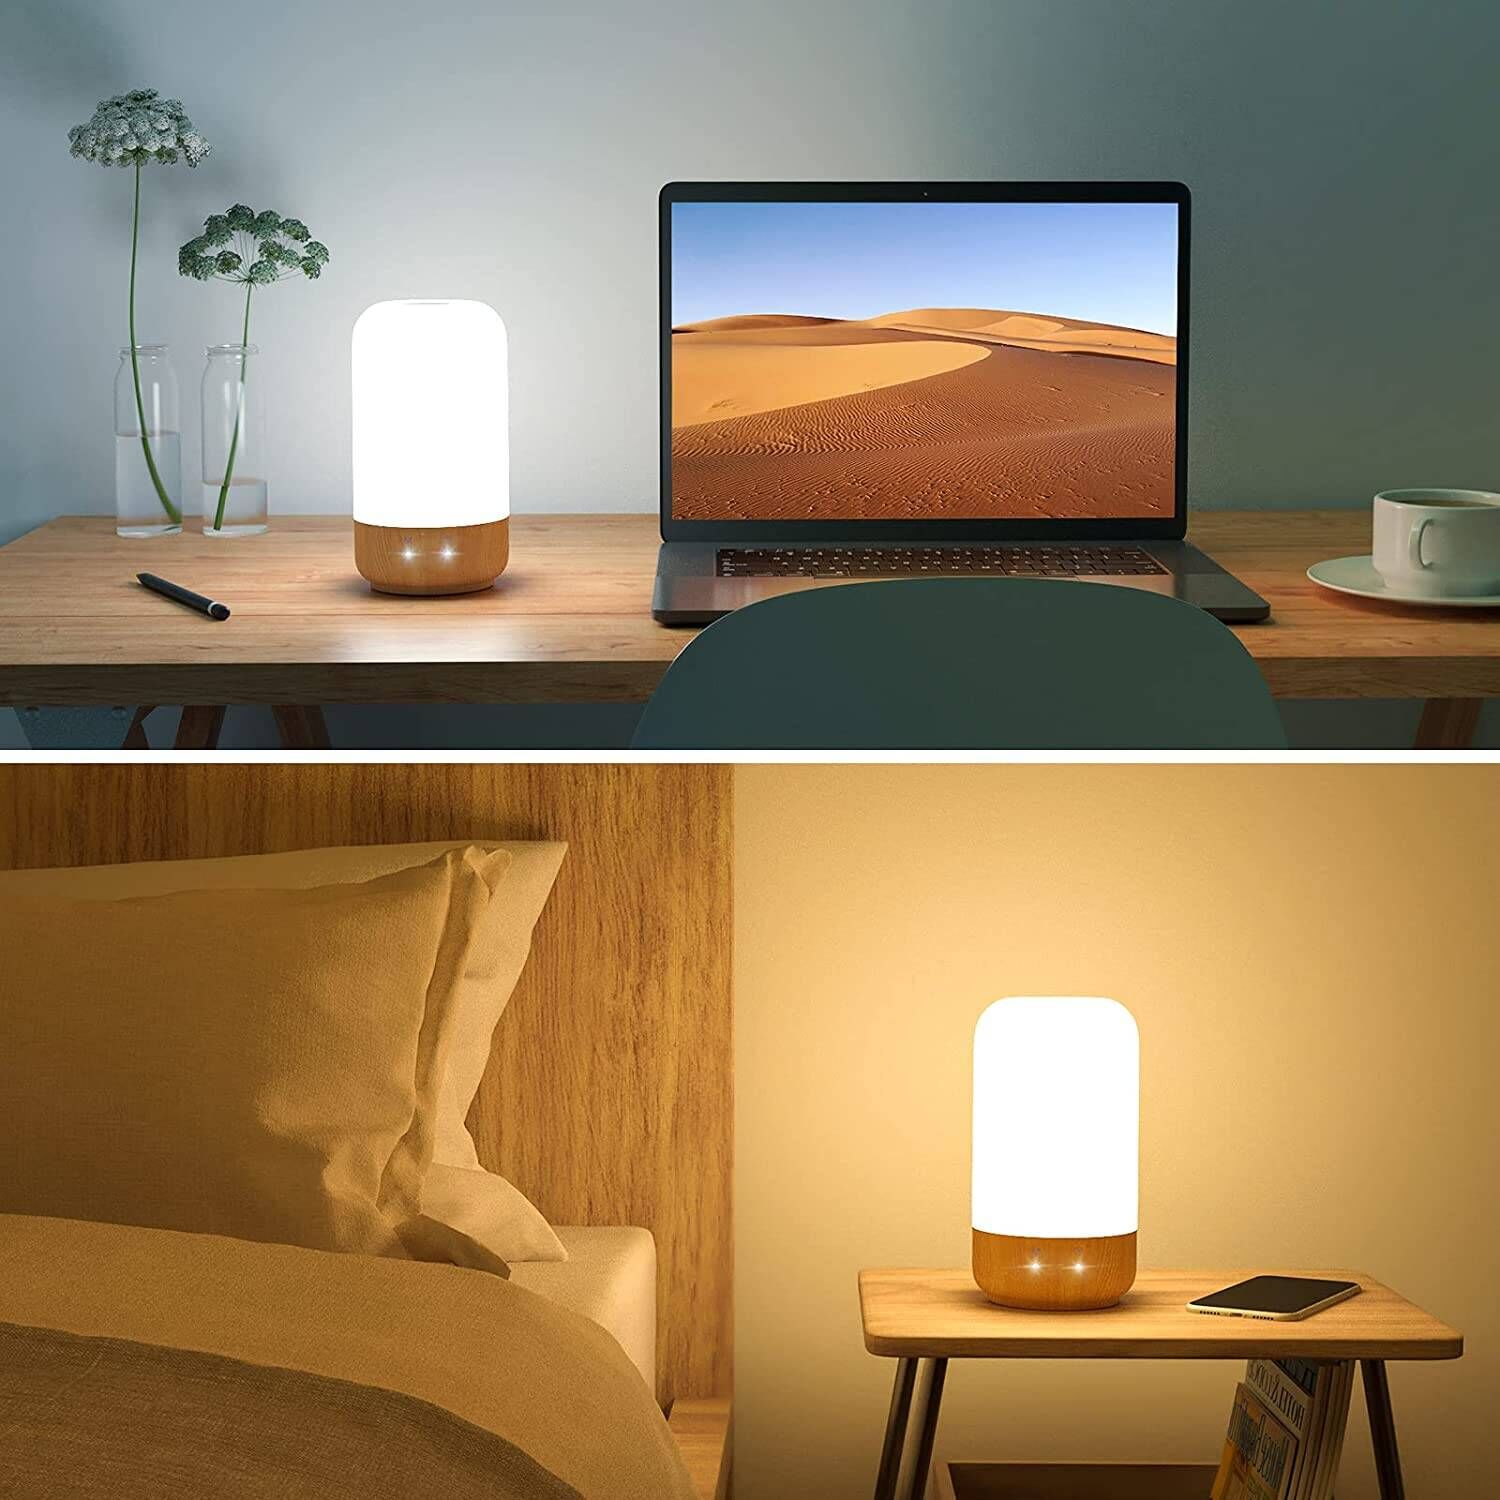 Millas desagüe Hacia abajo Lepro Smart Bedside Lamp Bedroom Table Lamp Works with Alexa Google Home  WiFi APP Phone Control Dimmable LED Nightstand Touch Lamp, Wood Grain Color